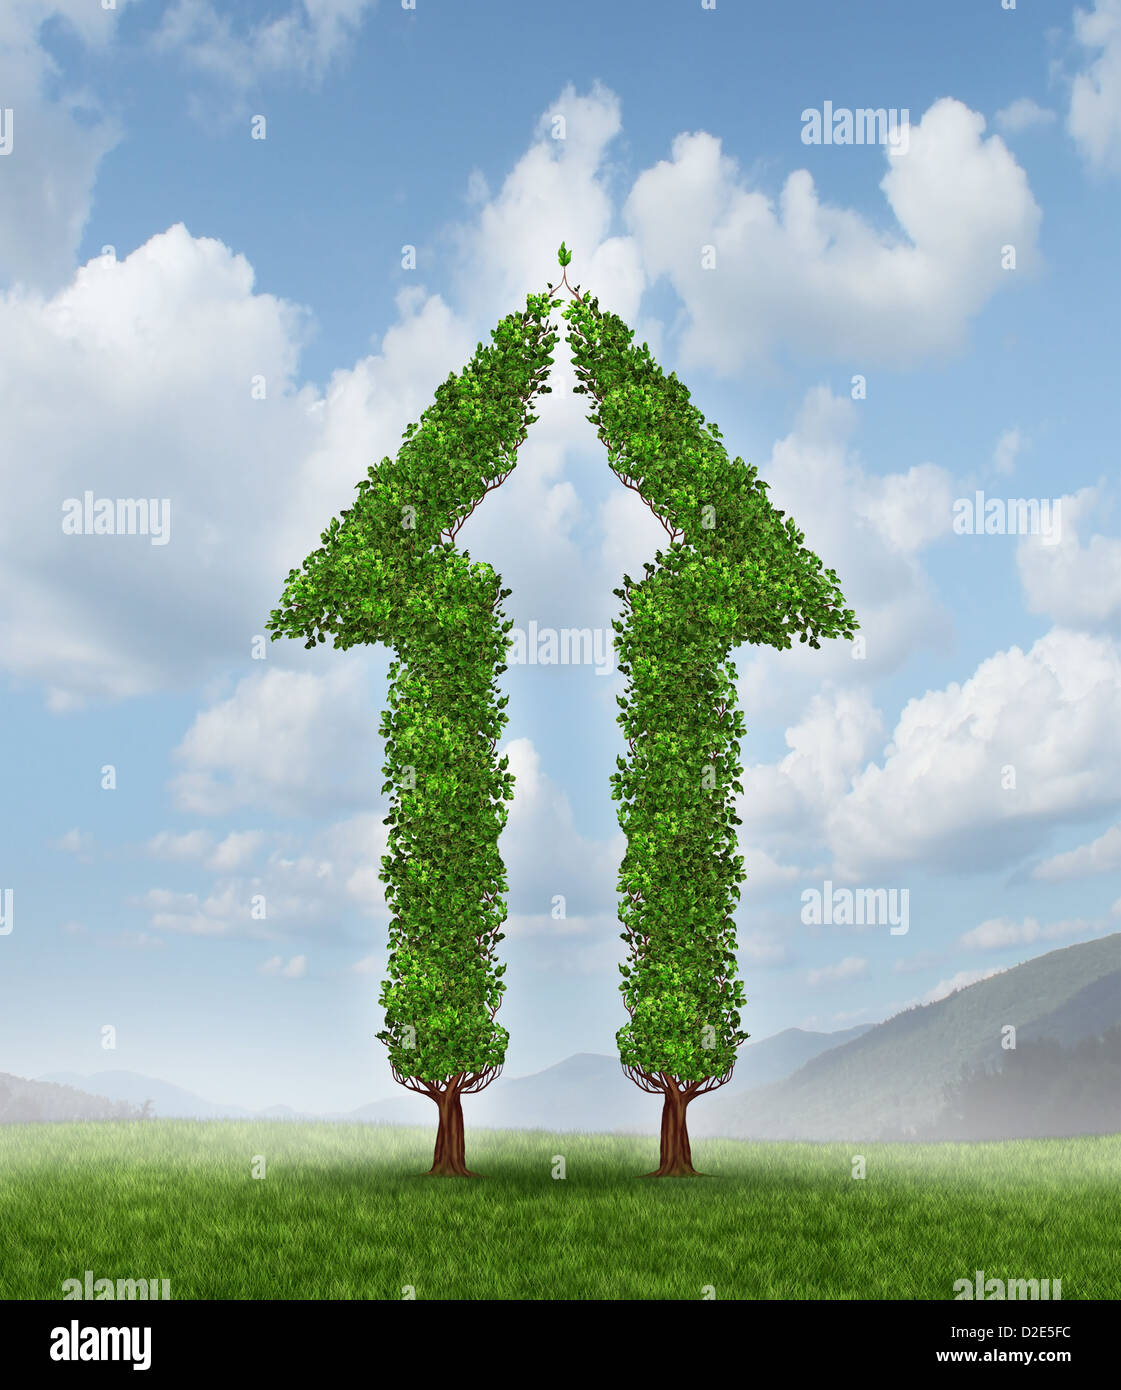 Growing group for partnership success as two trees in the shape of half an arrow coming together to form a whole upward symbol for financial wealth and high profits on a blue sky. Stock Photo